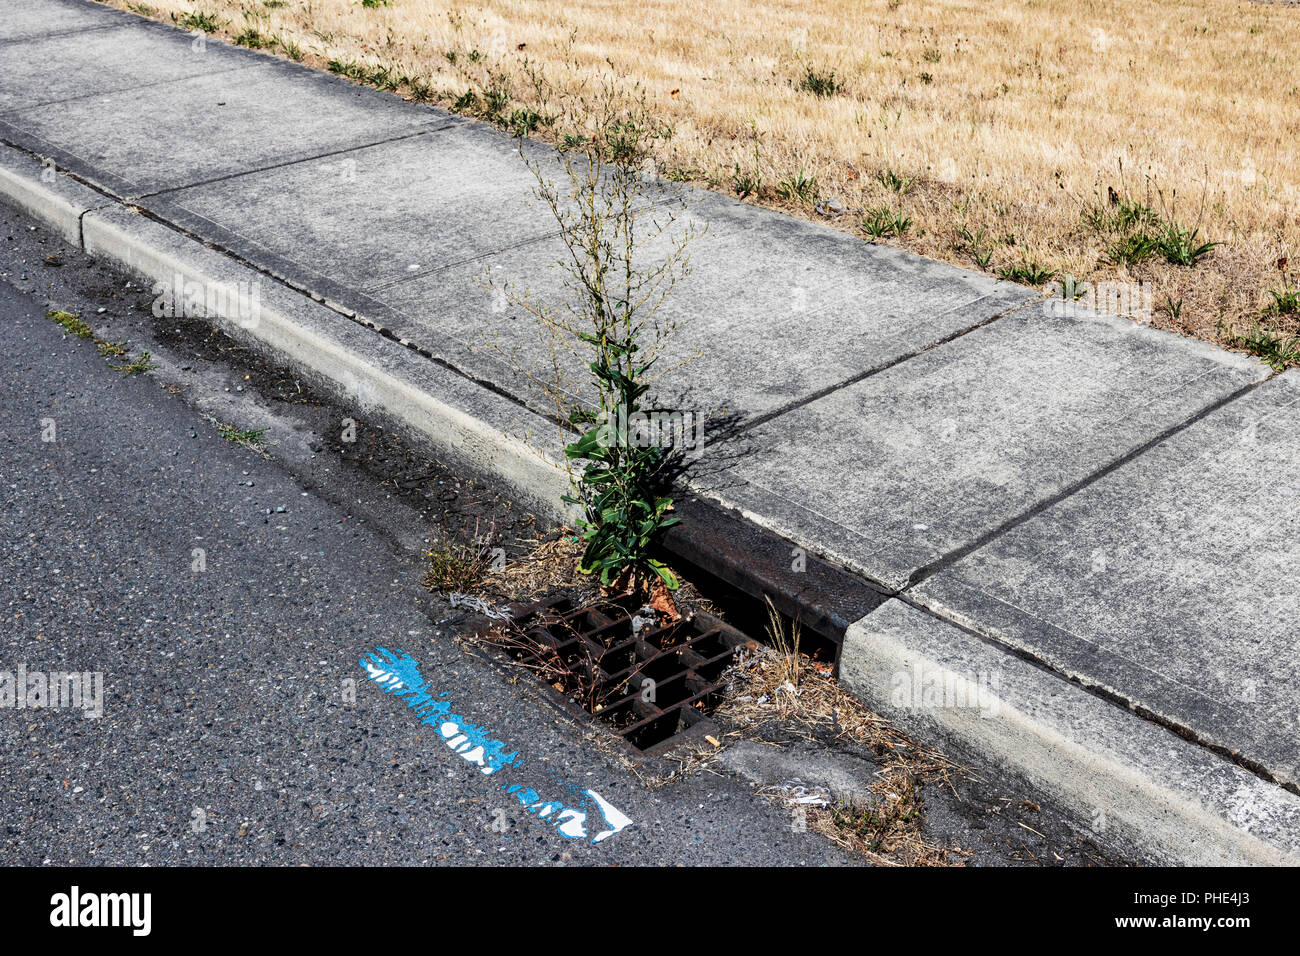 Curbside storm drain clogged with debris and a growing plant Stock Photo